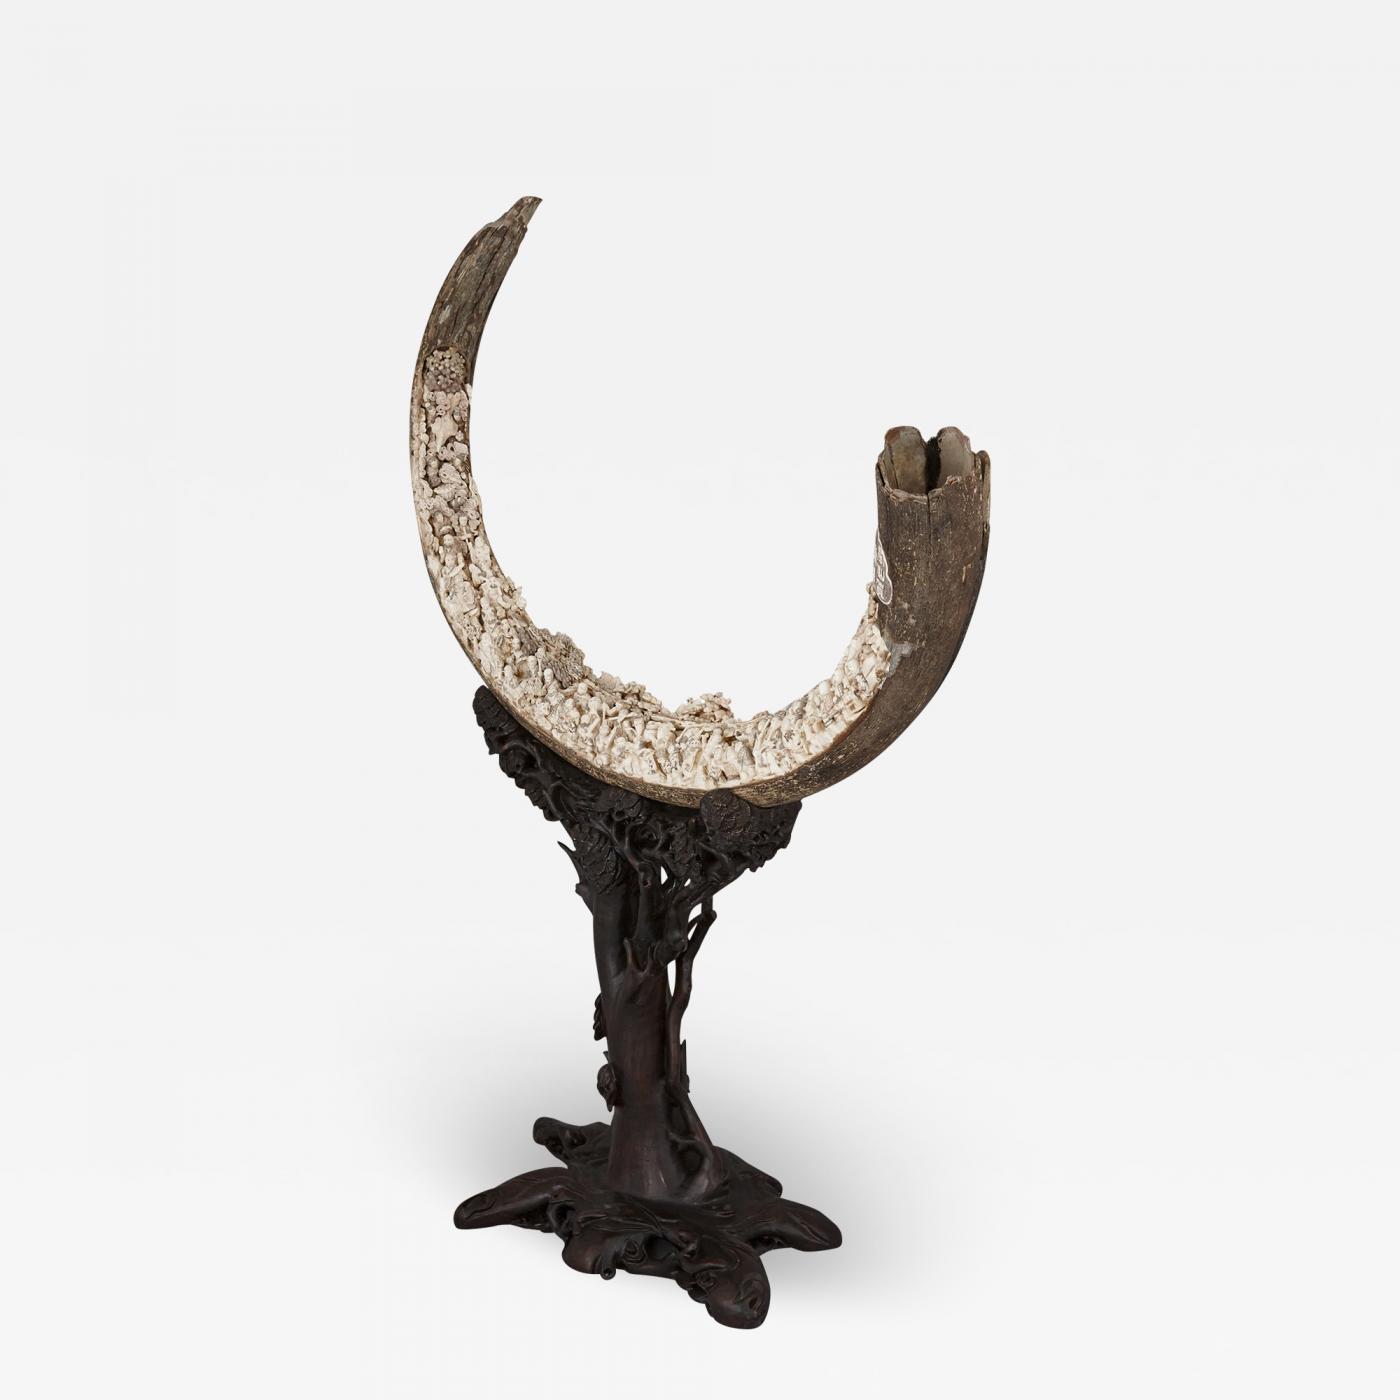 Mammoth Tusks For Sale